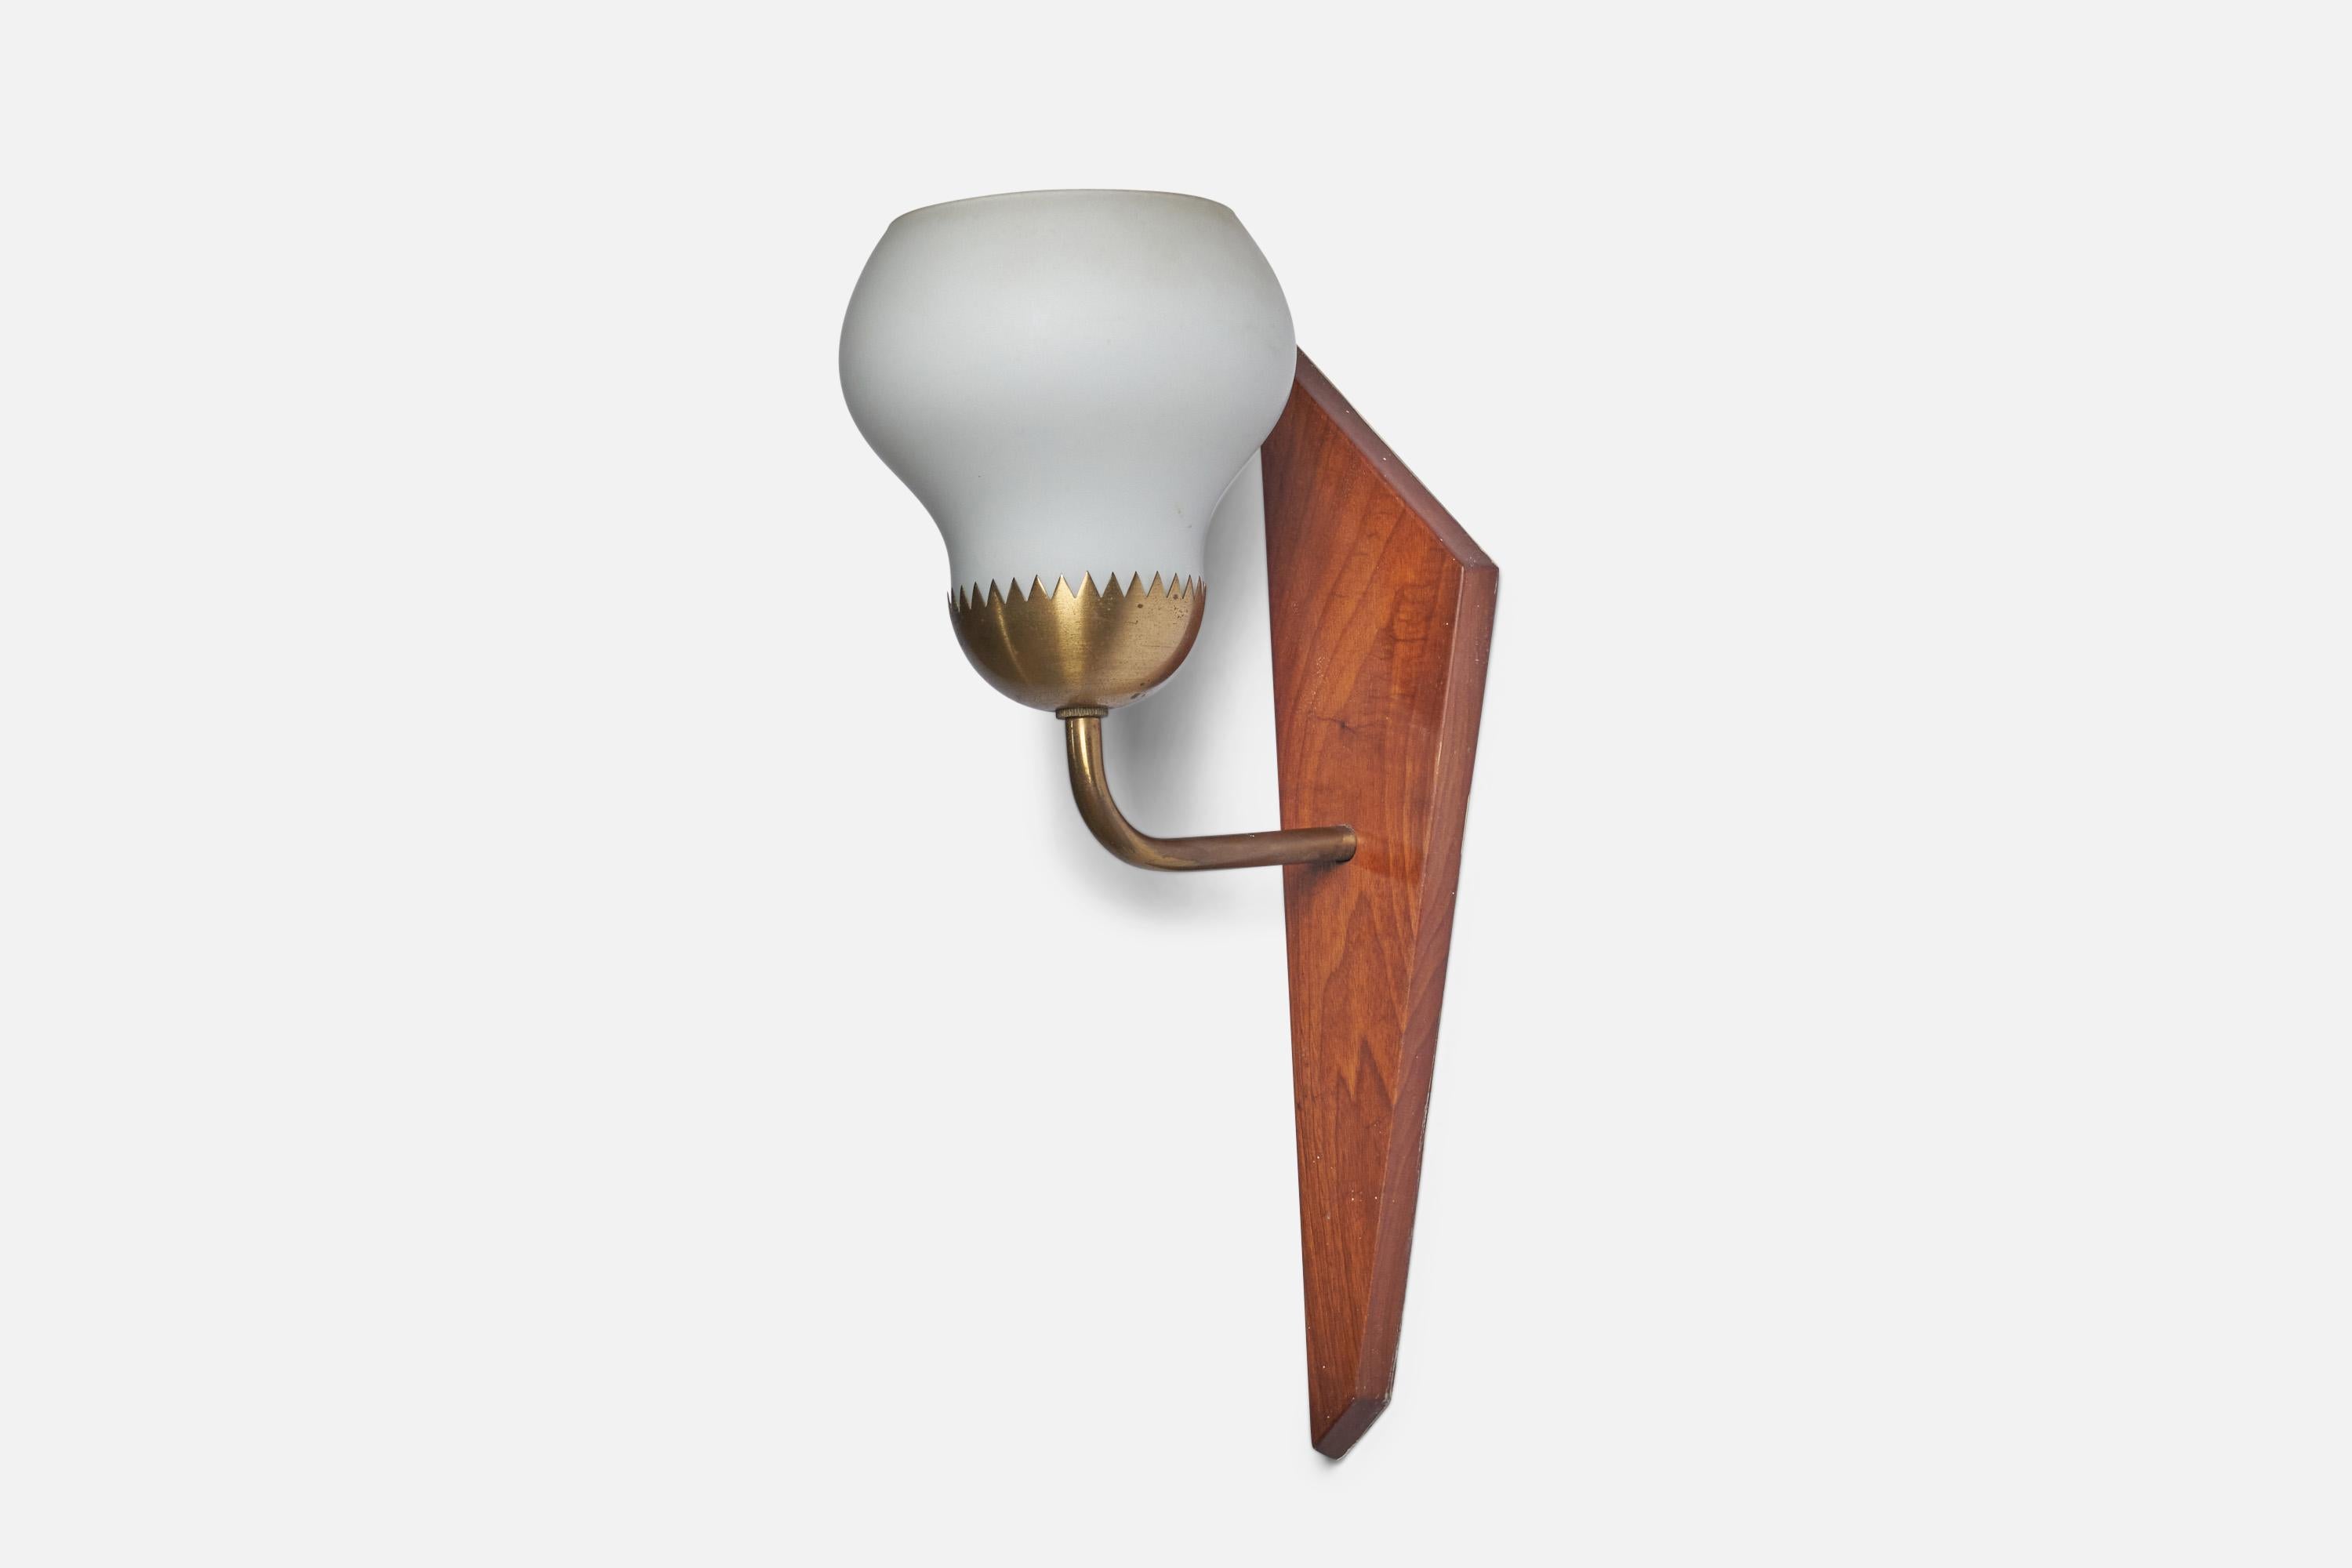 A brass, milk glass and teak wall light, designed and produced in Denmark, c. 1950s.

Overall Dimensions (inches): 14